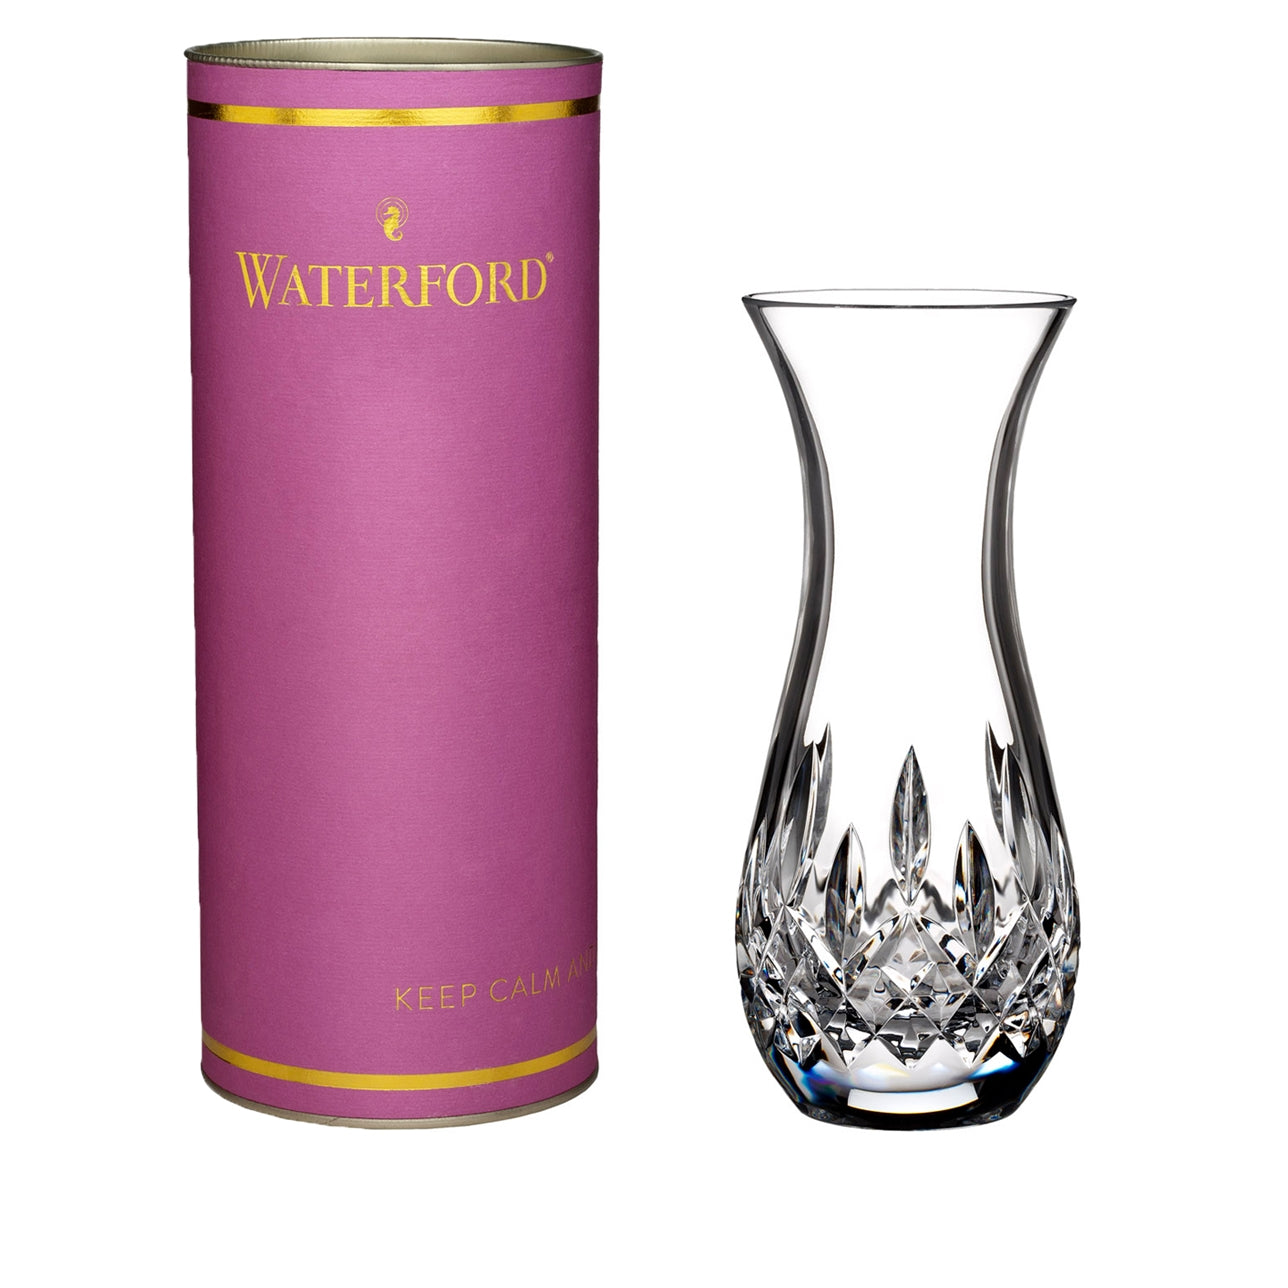 Waterford Giftology Lismore Sugar 6in Bud Vase  The Giftology collection features Waterford's best crystal gifts in compelling gift boxes designed in 5 different eye-catching colour schemes with opulent gold touches.